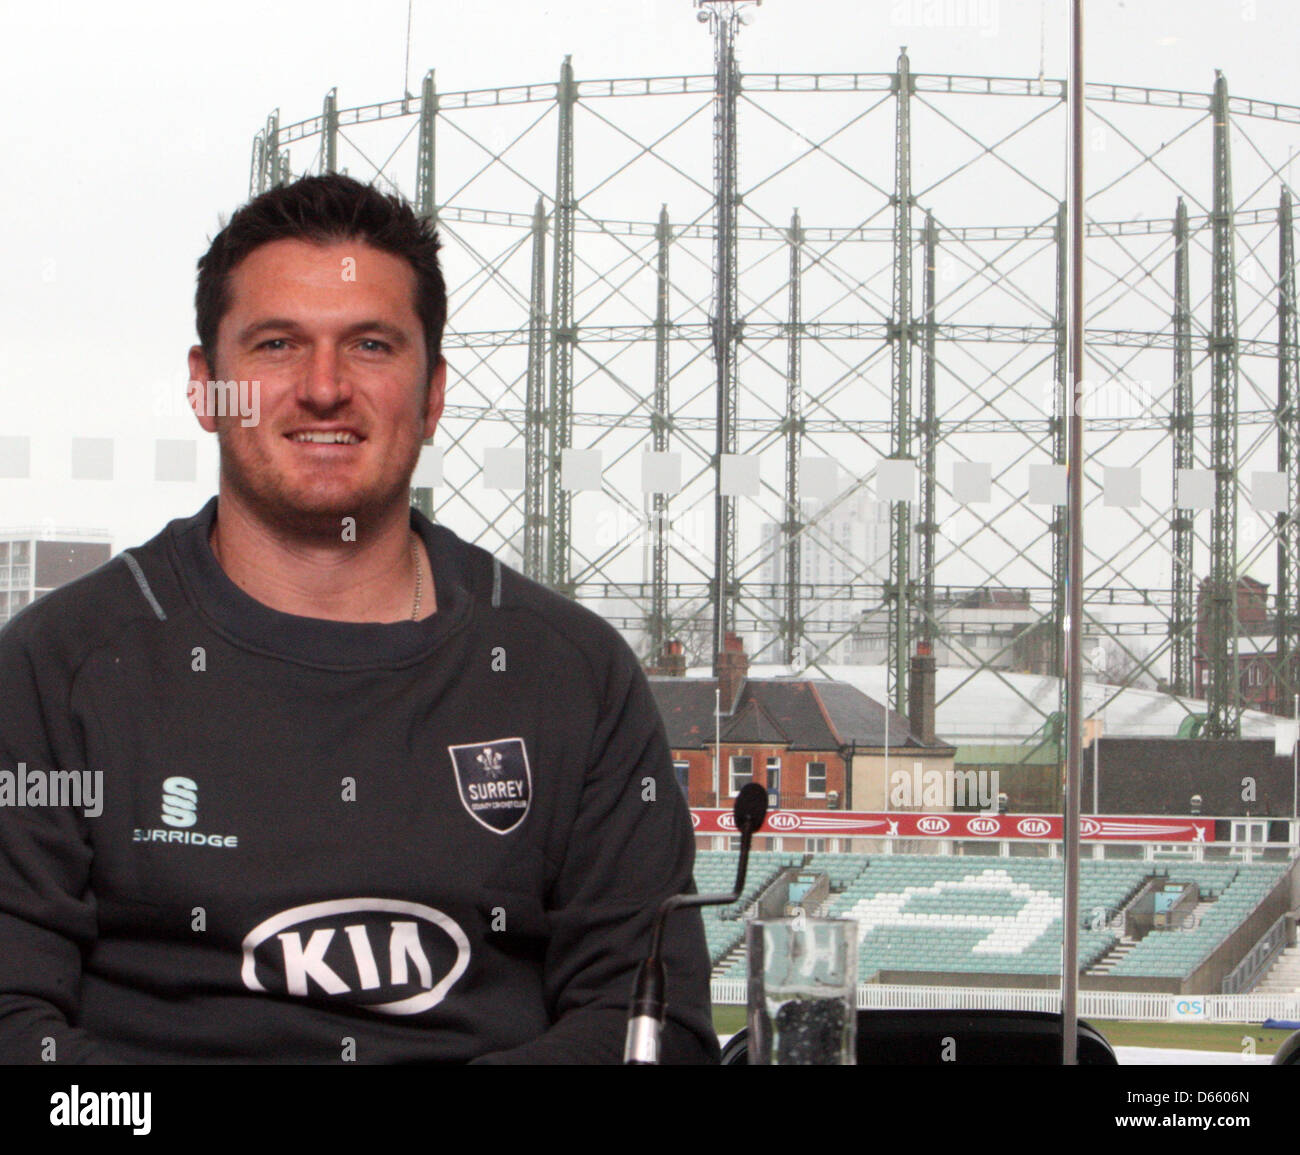 London, England, UK. 12th April 2013.   Graeme Smith of Surrey CCC during the Surrey Media day from the Oval. Credit: Action Plus Sports Images / Alamy Live News Stock Photo